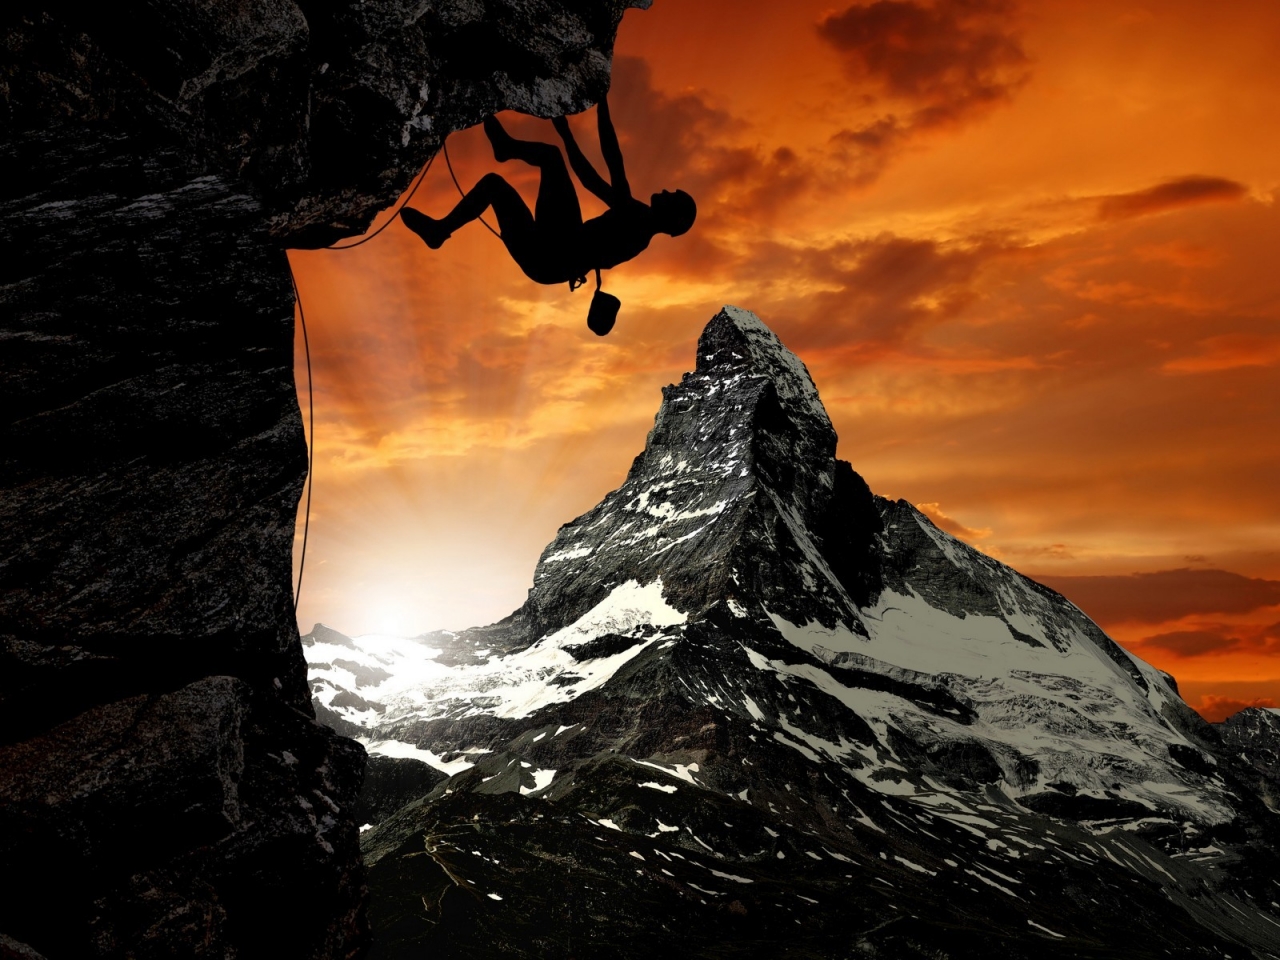 Mountain Climber for 1280 x 960 resolution